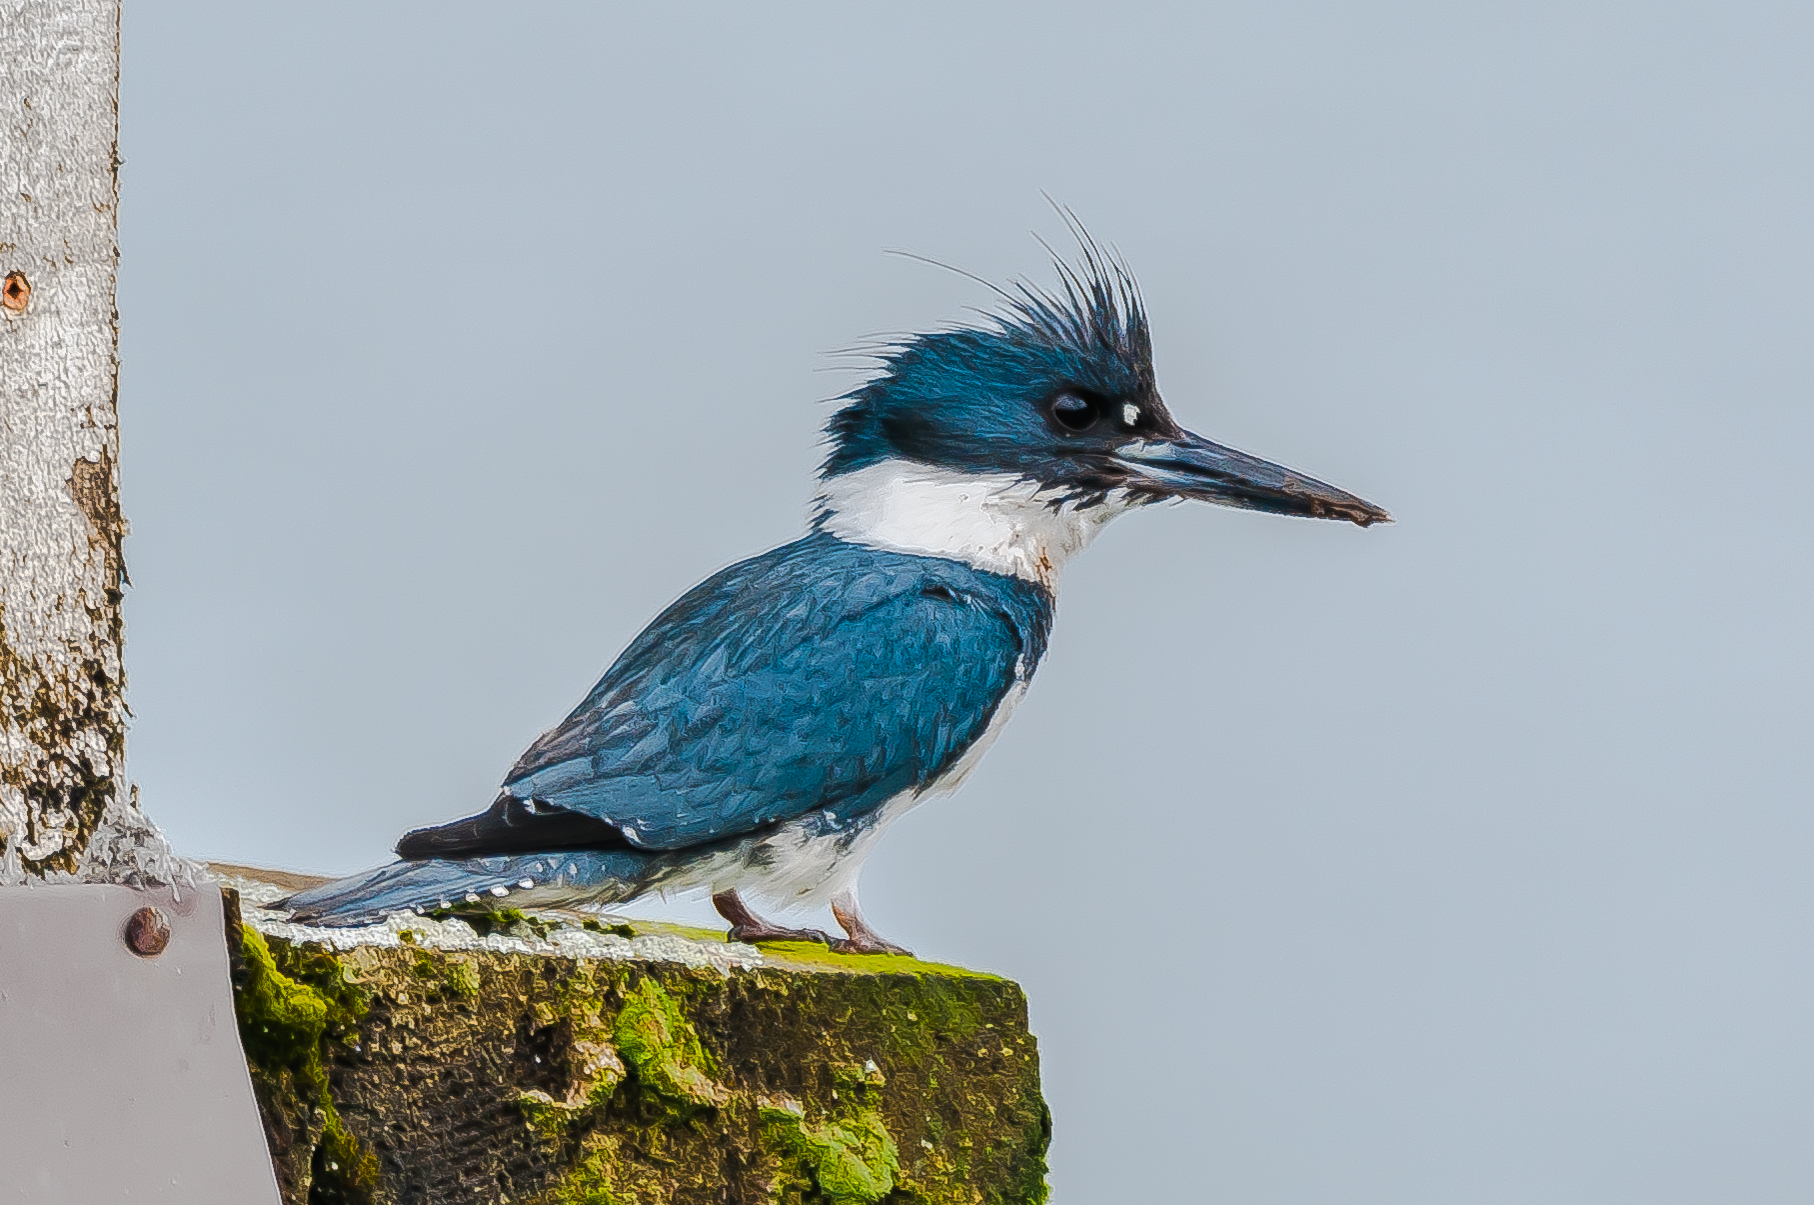 Tulalip Bay's belted kingfishers are kings of the waterfront